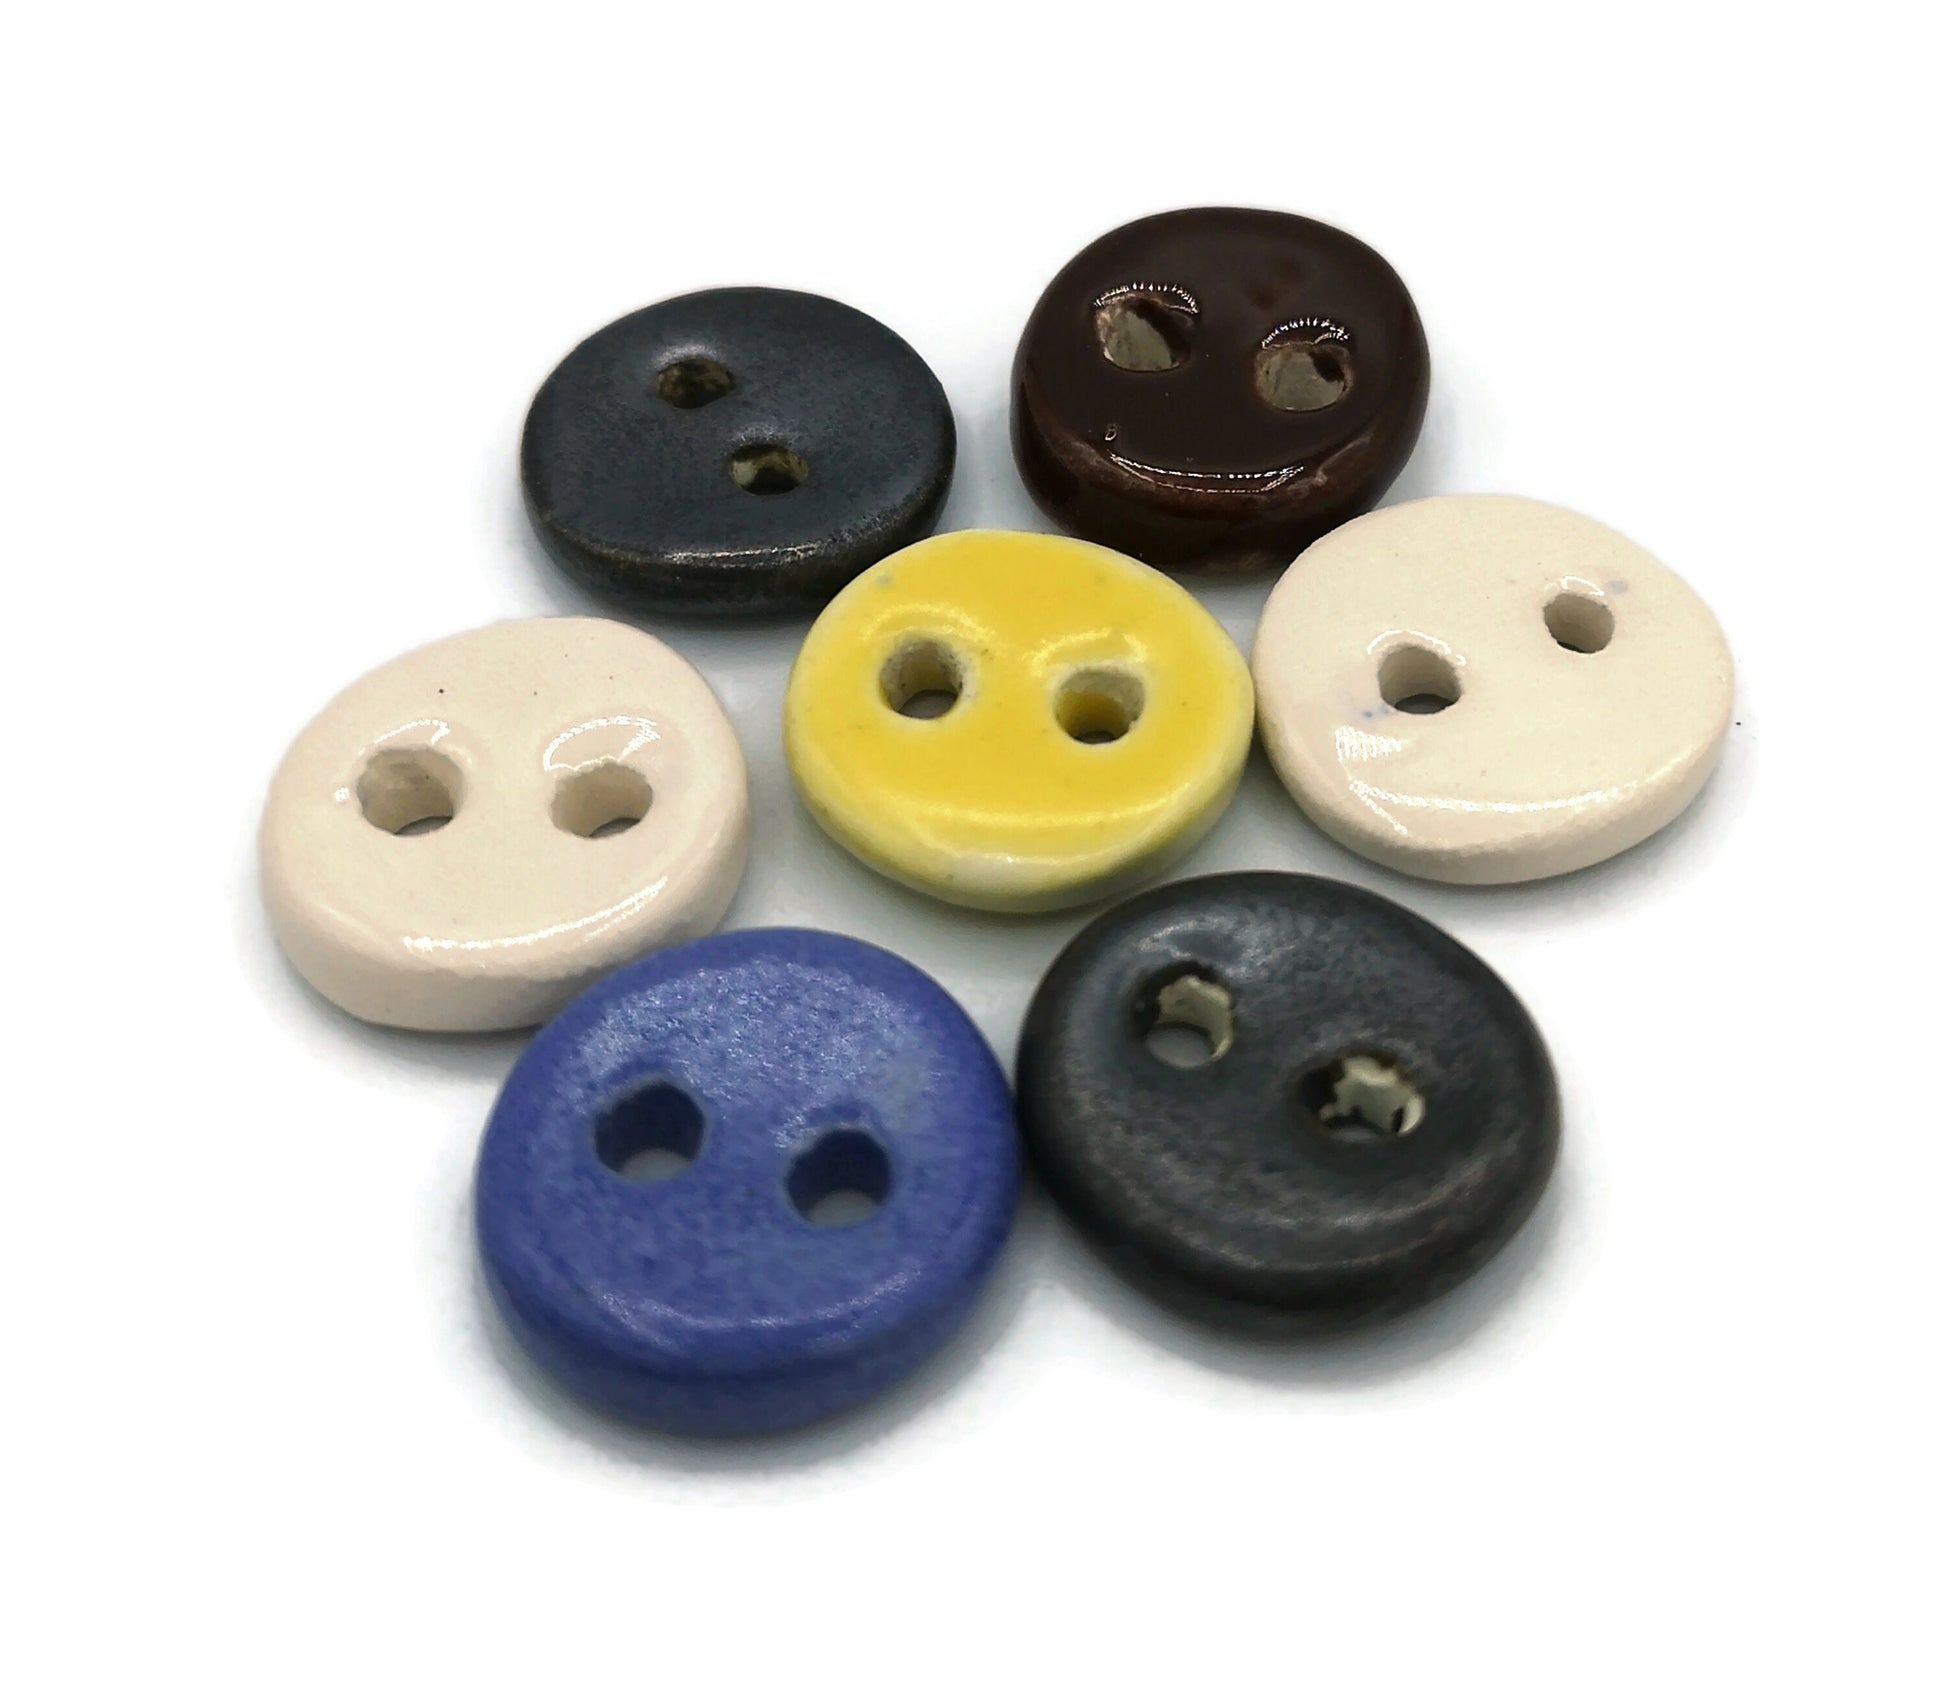 Unique Buttons Set Of 7, Novelty Theme Buttons, Clay Buttons Custom, Flat Buttons Lot, Best Sellers Sewing Supplies And Notions Round Button - Ceramica Ana Rafael